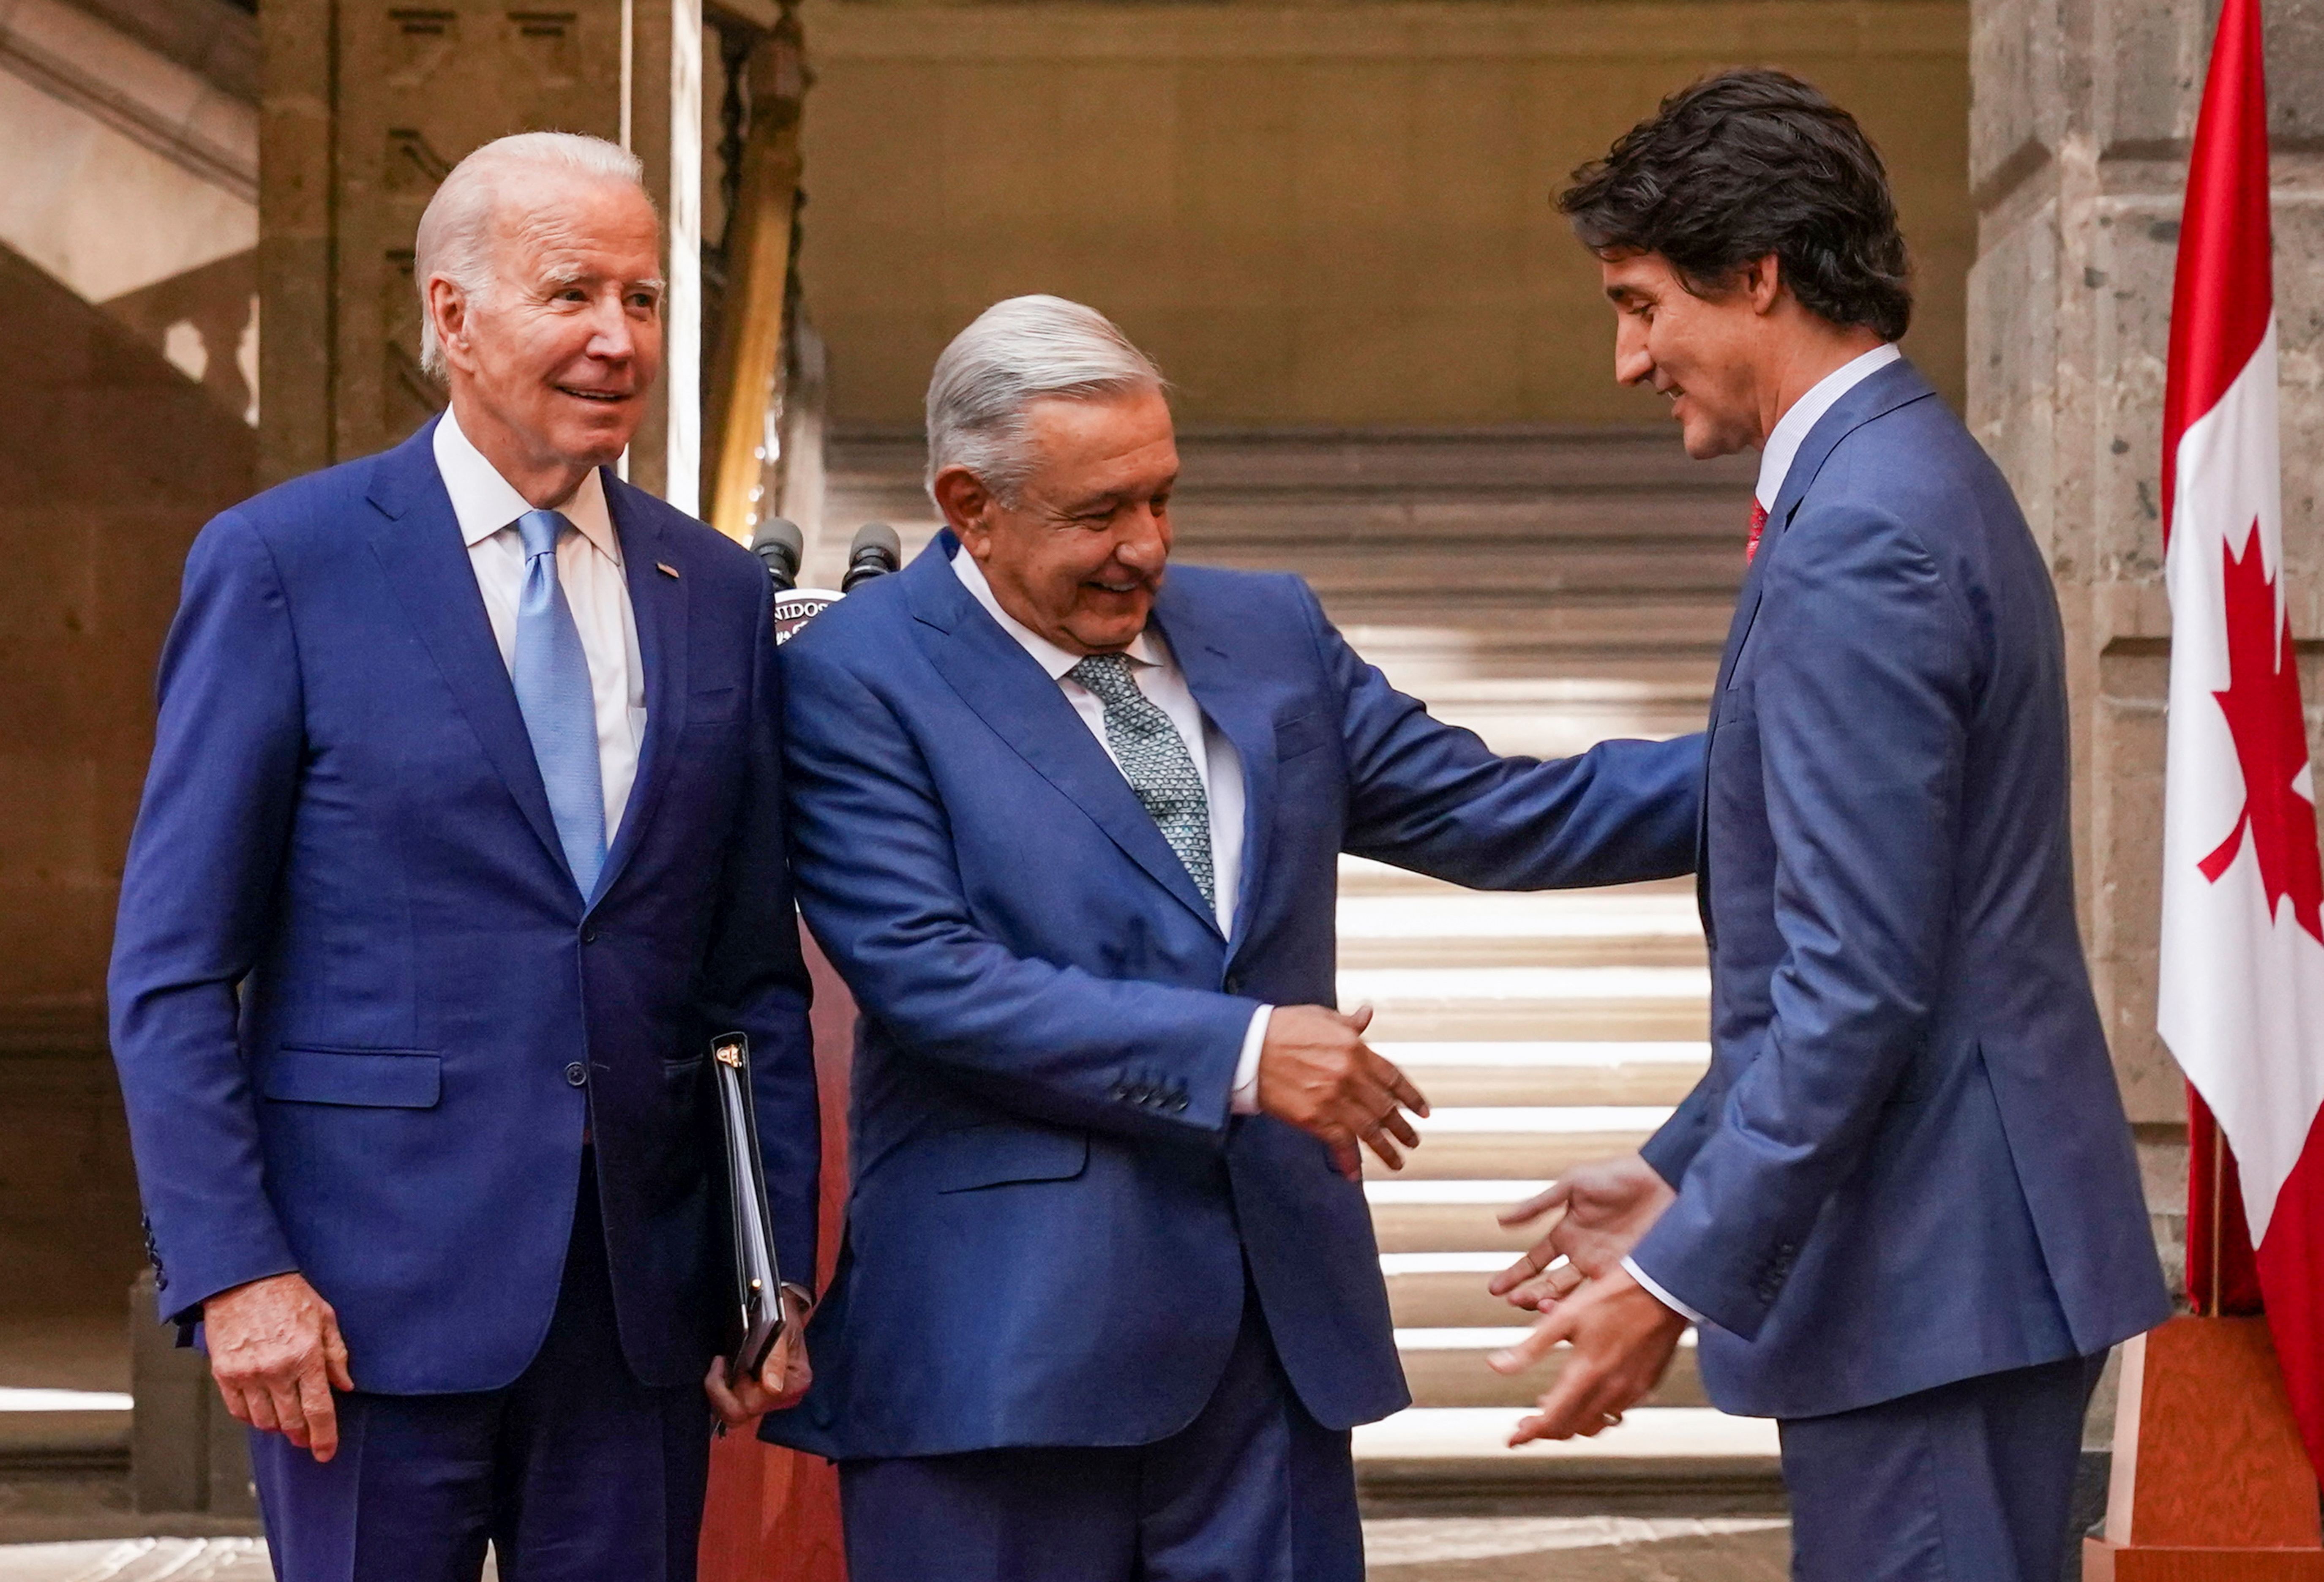 Mexican President Andres Manuel Lopez Obrador greets Canadian Prime Minister Justin Trudeau next to US President Joe Biden at the conclusion of the North American Leaders' Summit in Mexico City, Mexico, January 10, 2023. REUTERS/Kevin Lamarque